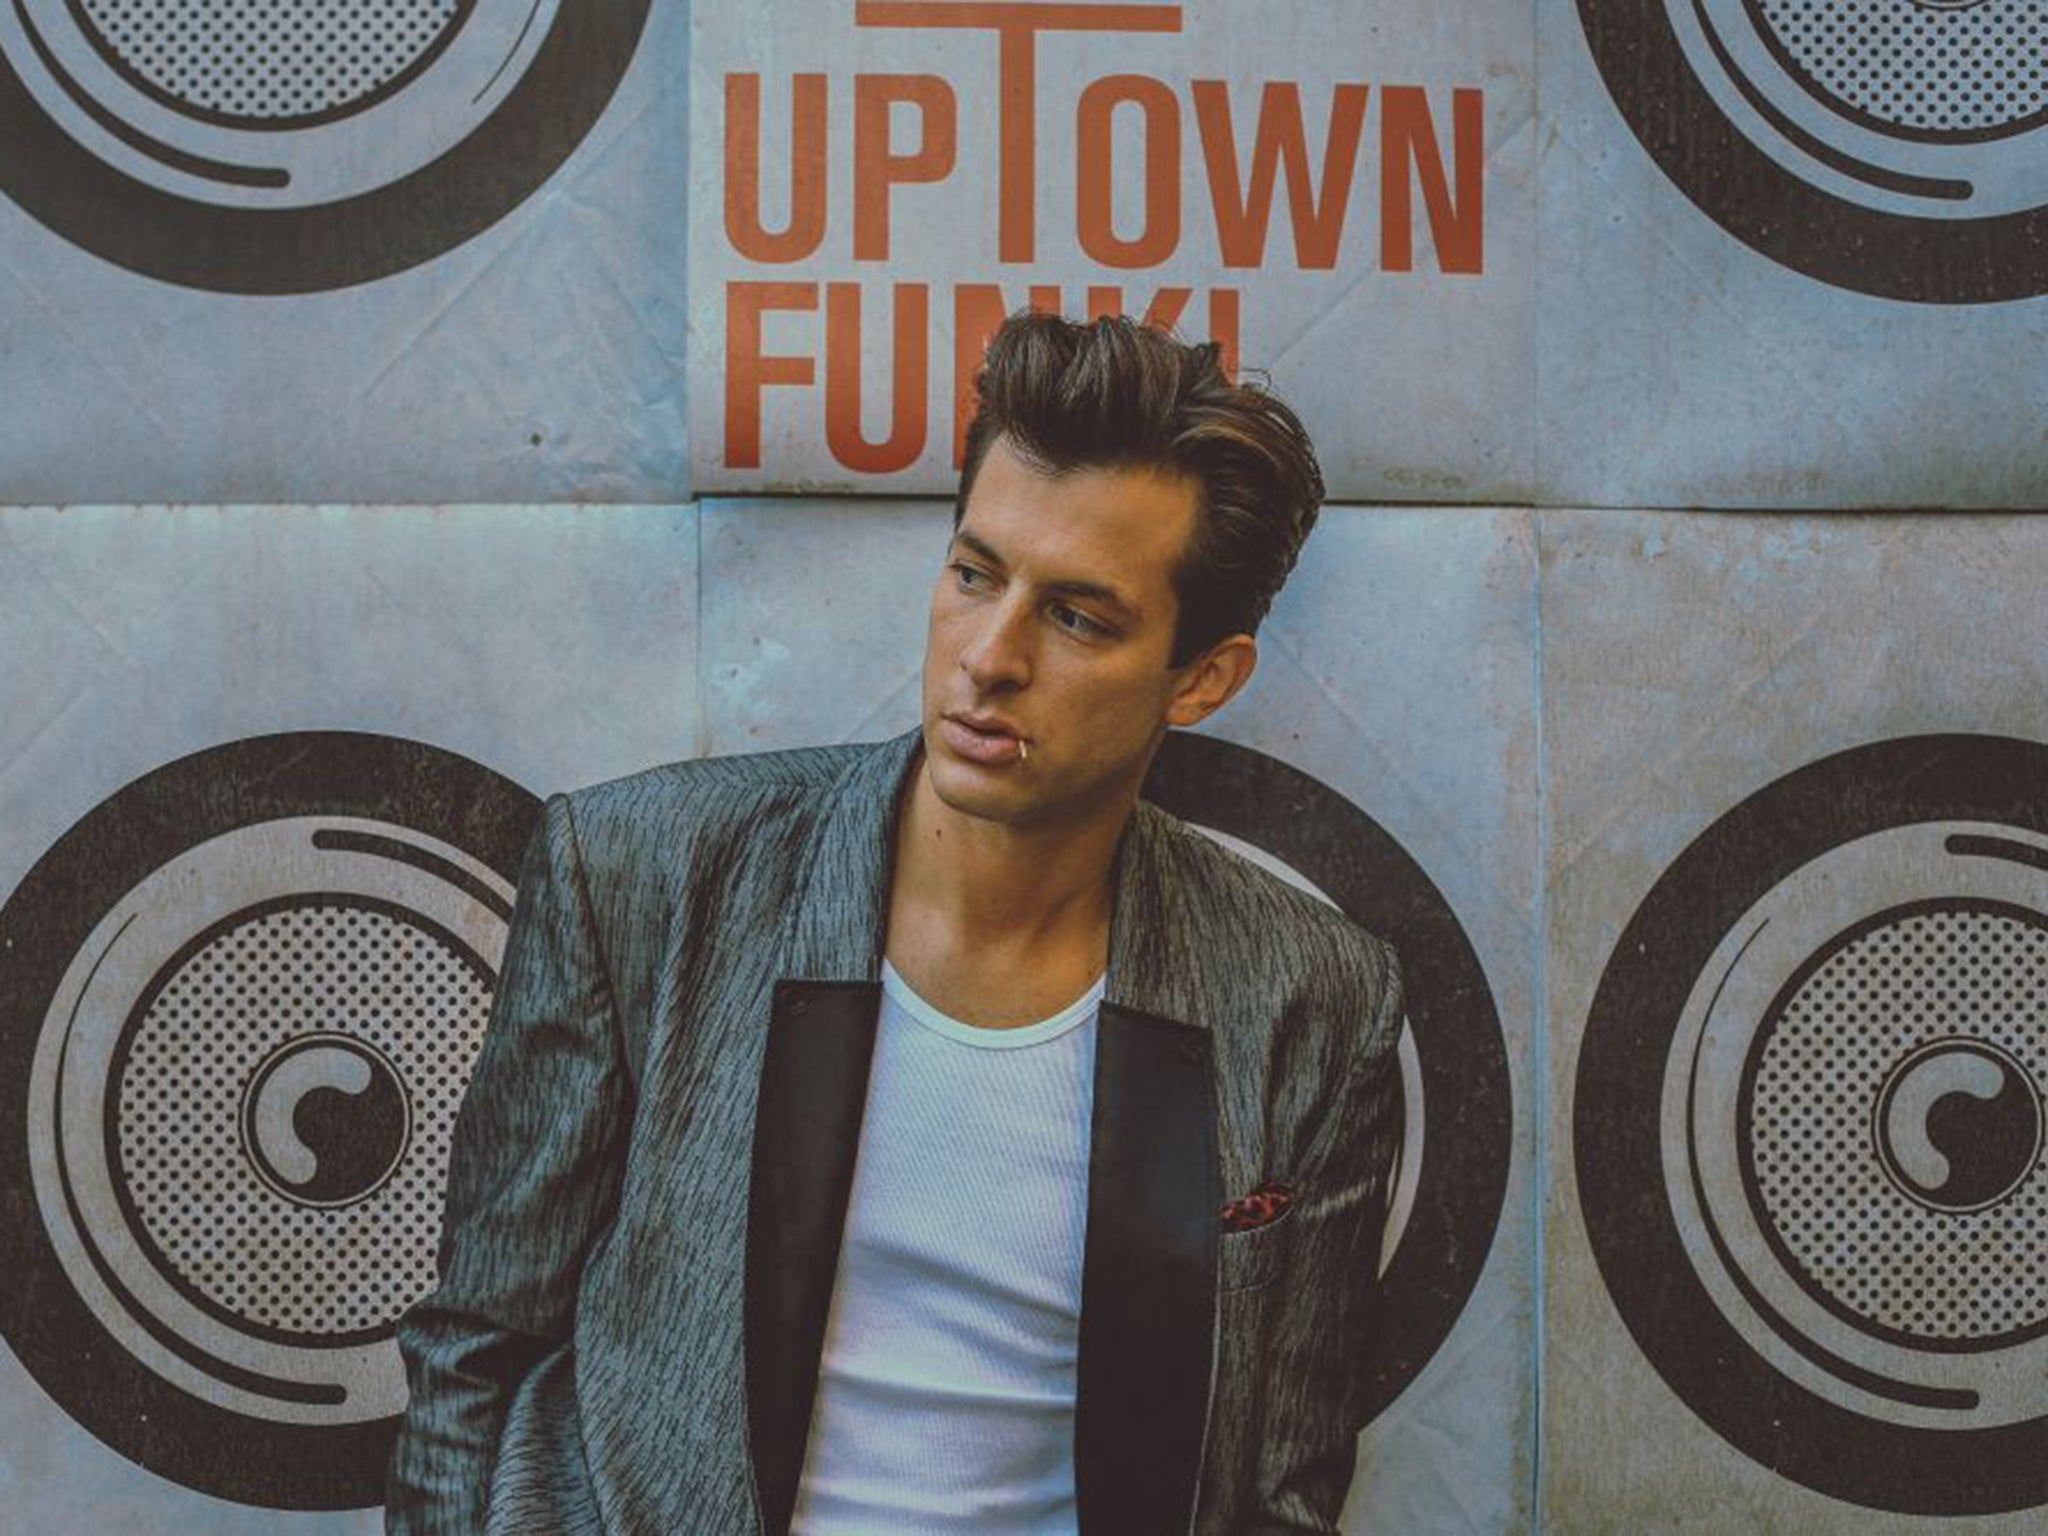 Mark Ronson’s ‘Uptown Funk’ single was played 45 million times on audio streaming services